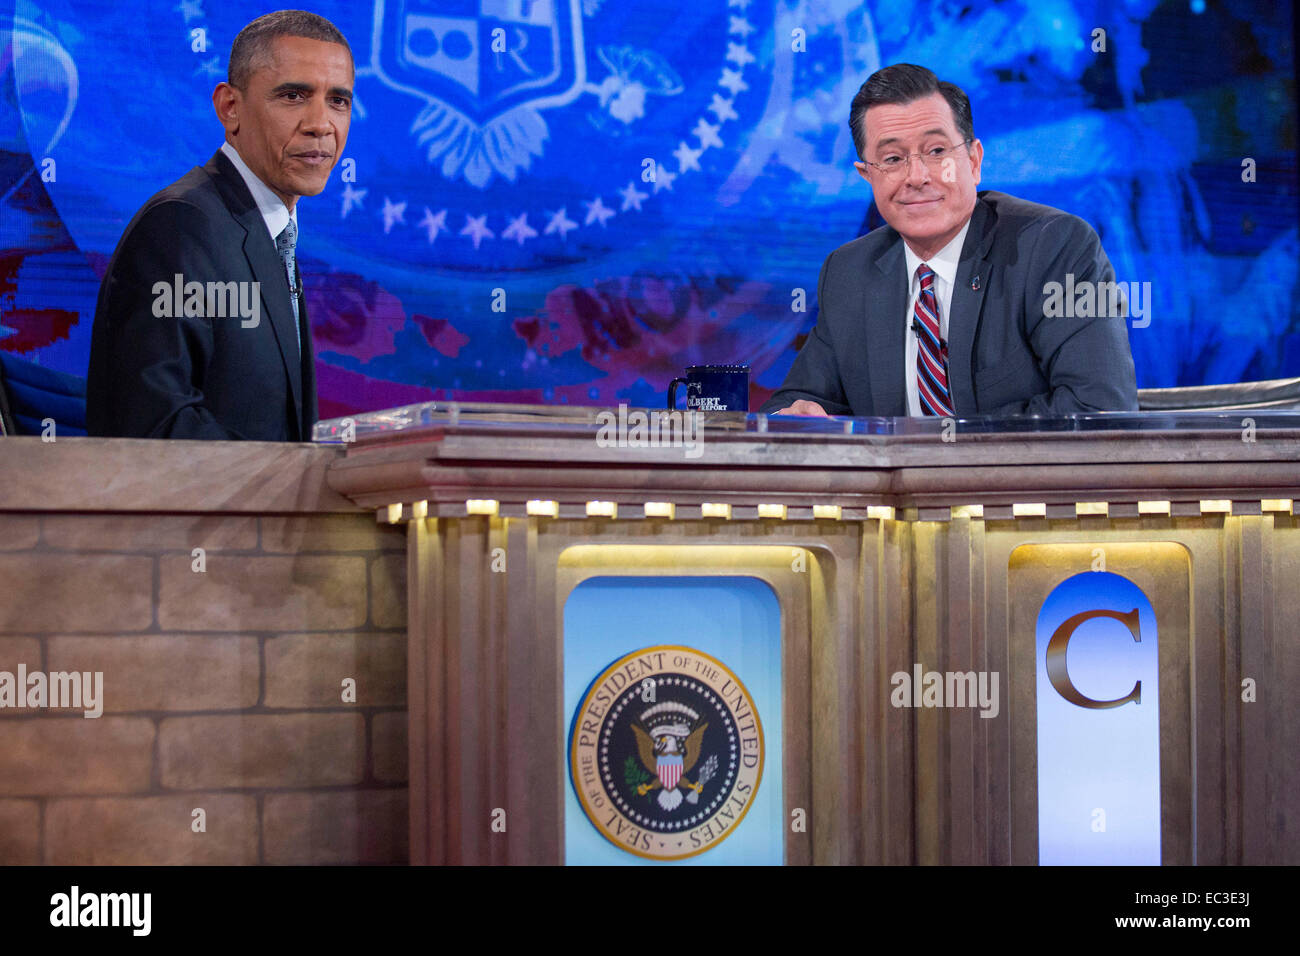 Washington, DC, USA. 8th Dec, 2014. United States President Barack Obama, left, tapes Comedy Central's 'The Colbert Report' with television personality Stephen Colbert in Lisner Auditorium on the campus of George Washington University in Washington, DC, U.S., on Monday, December 8, 2014. This is President Obama's third appearance on 'The Colbert Report' that will broadcast its final show on December 18, 2014. Credit:  dpa picture alliance/Alamy Live News Stock Photo